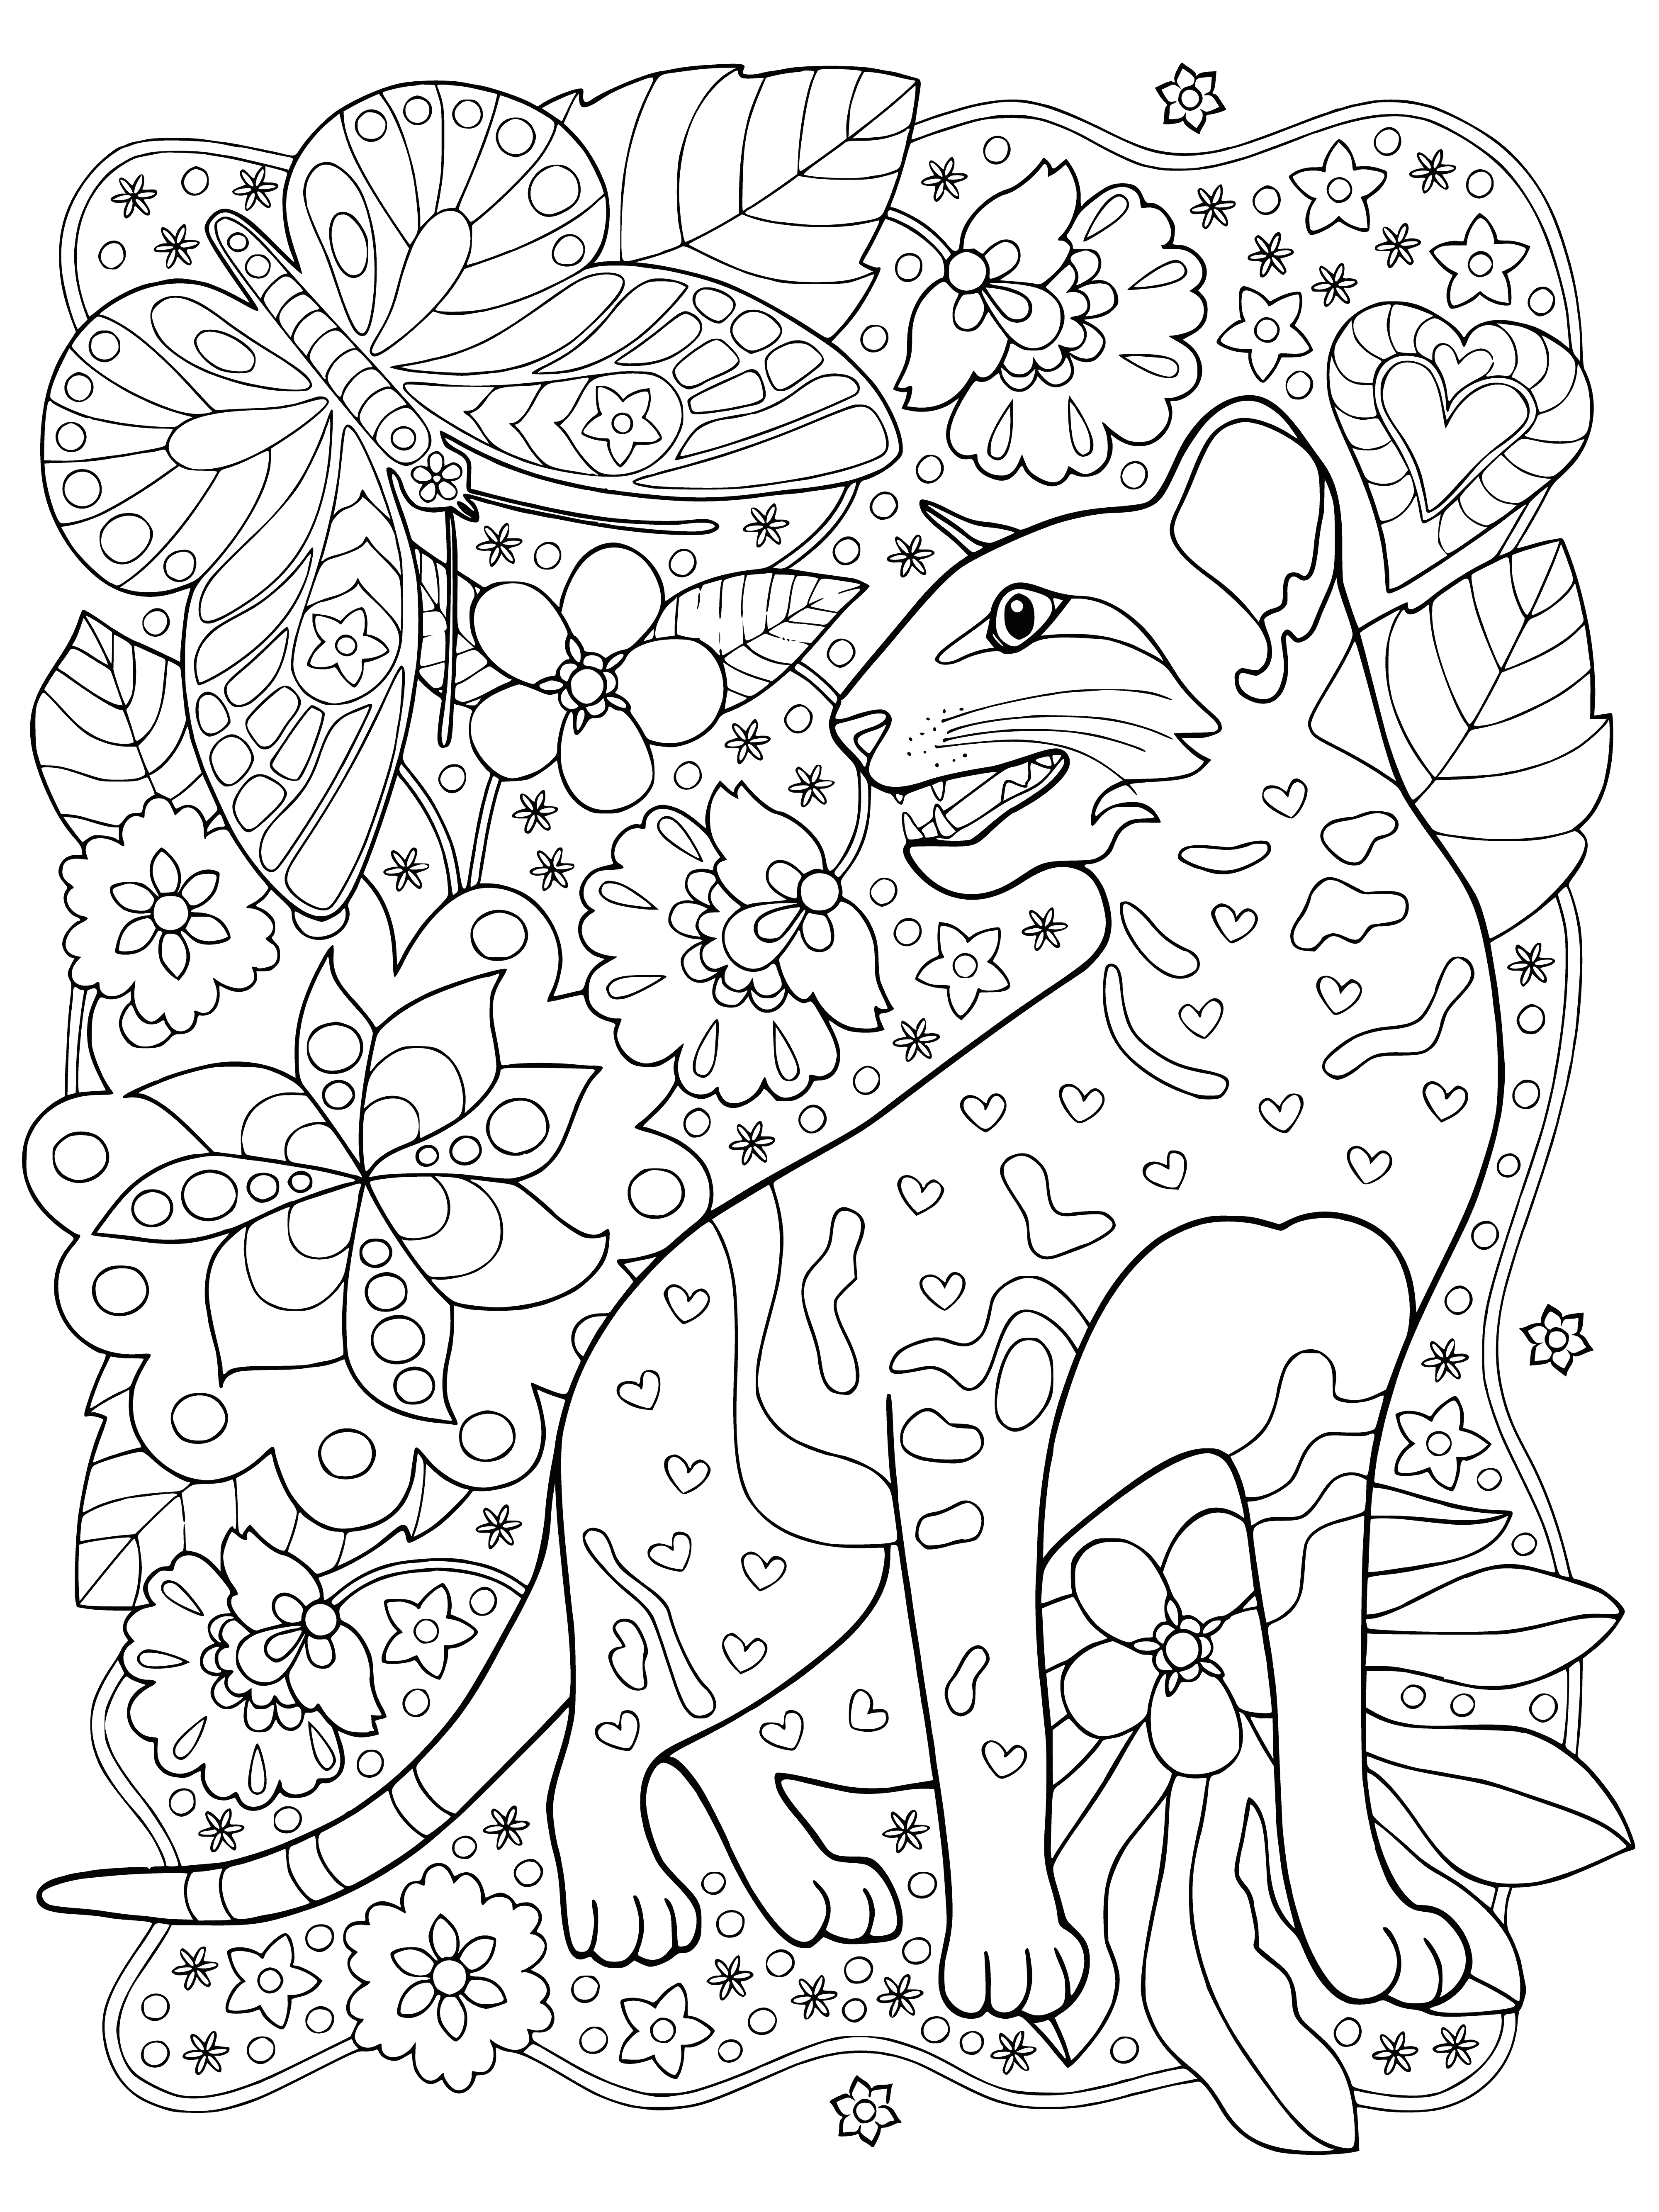 coloring page: Cat in chair with bow tie and thought bubble of heart - ready for something special.